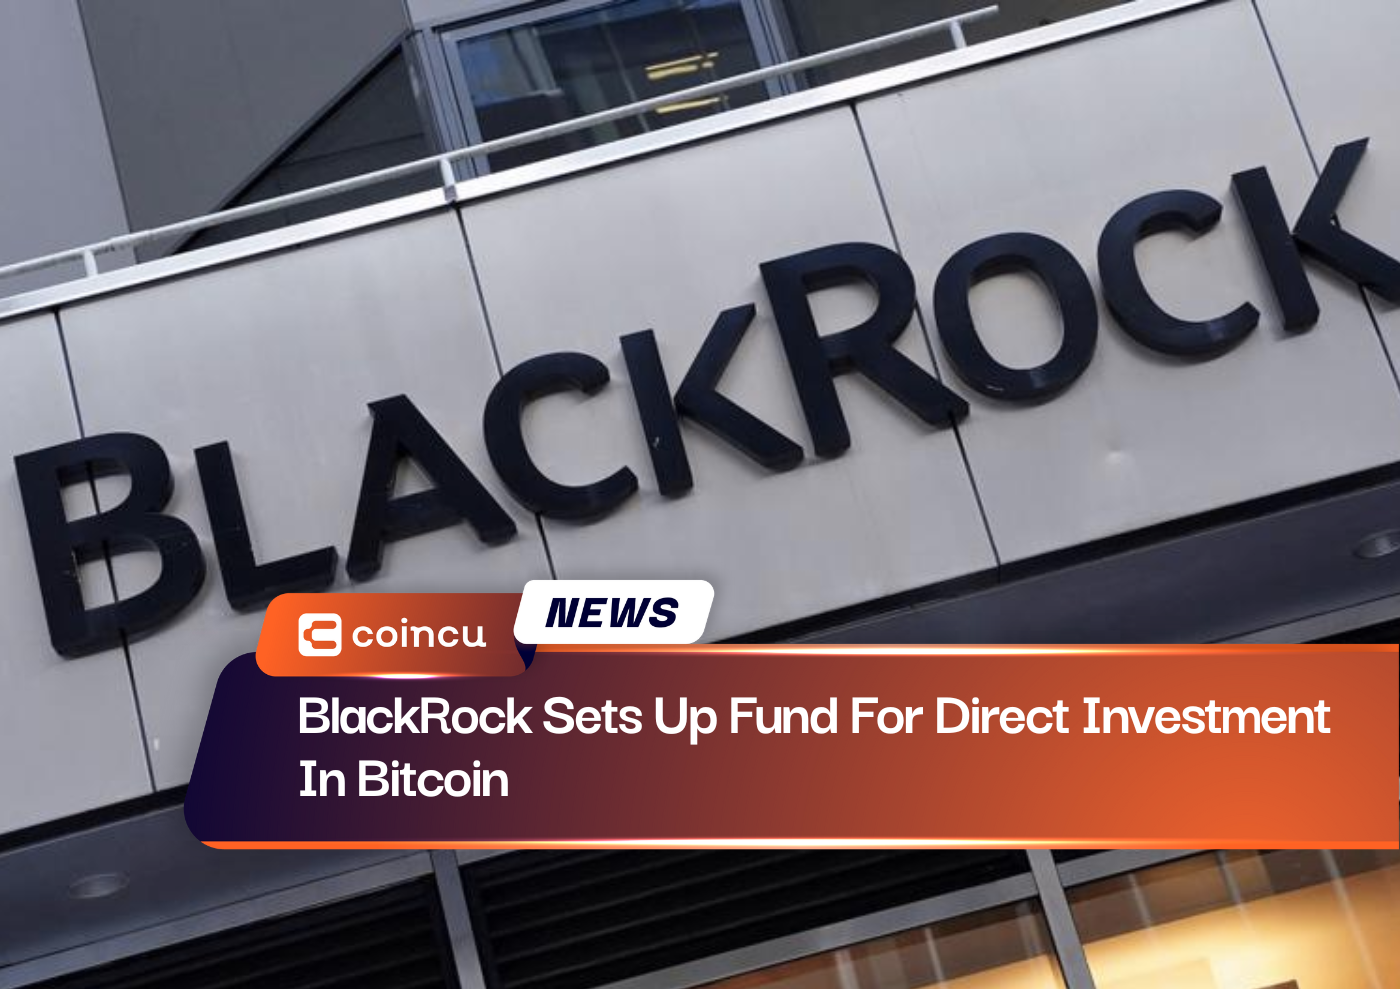 BlackRock Sets Up Fund For Direct Investment In Bitcoin